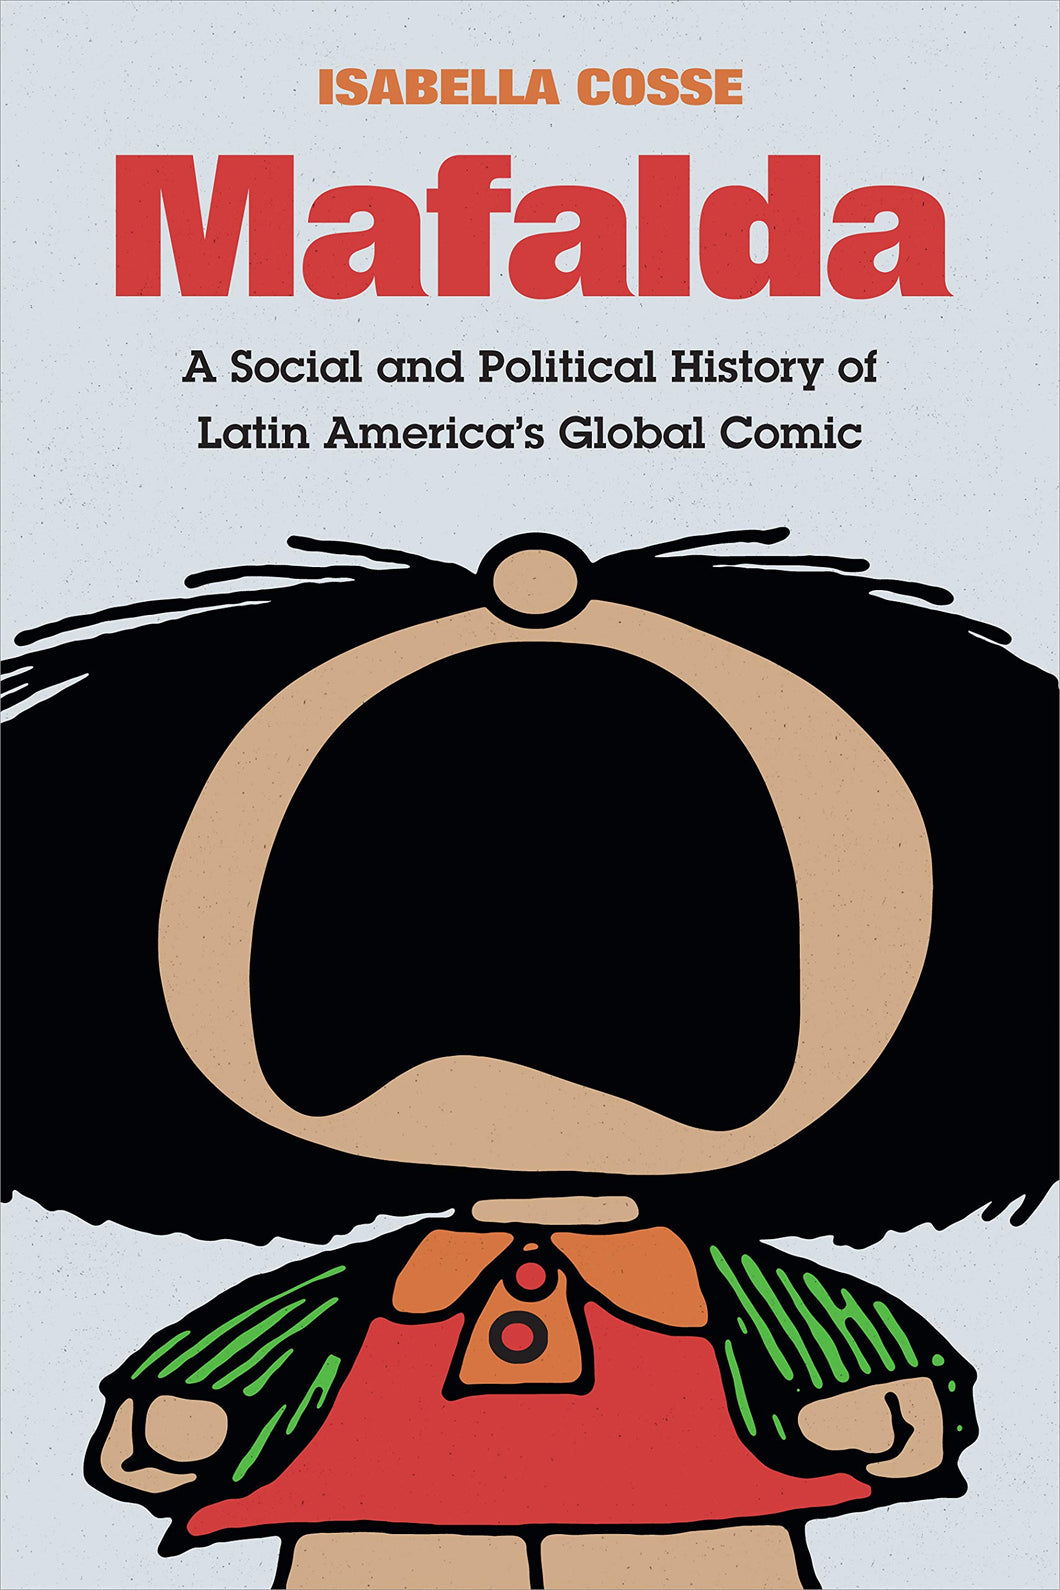 Mafalda: A Social and Political History of Latin America's Global Comic by Isabella Cosse